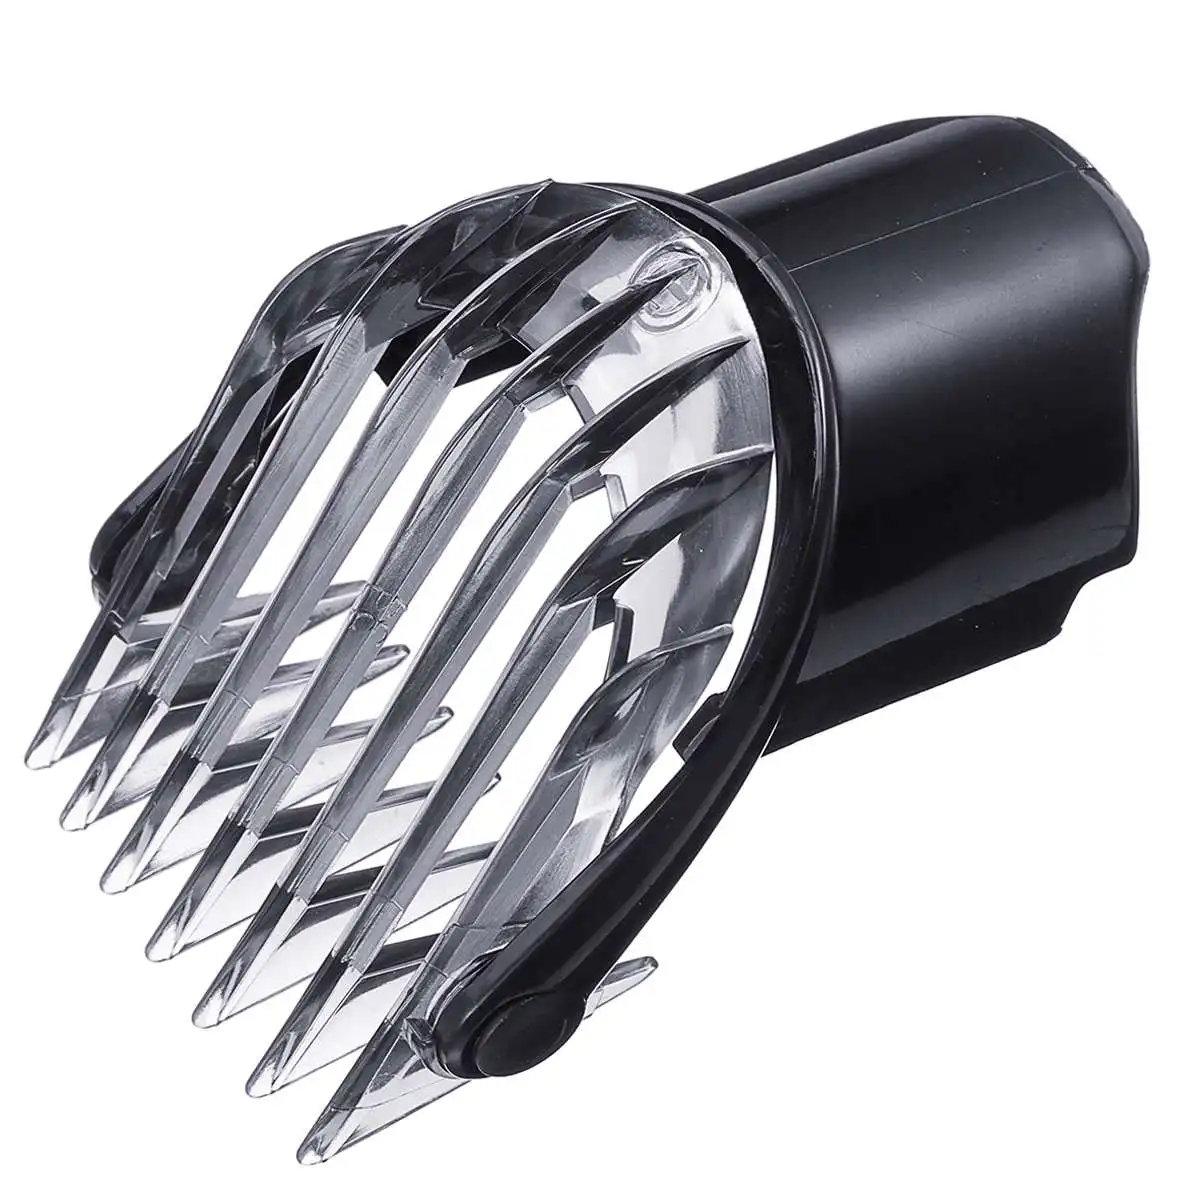 3 21mm Electric Trimmer Guide Comb Beard Hair Clipper Guide Comb ...